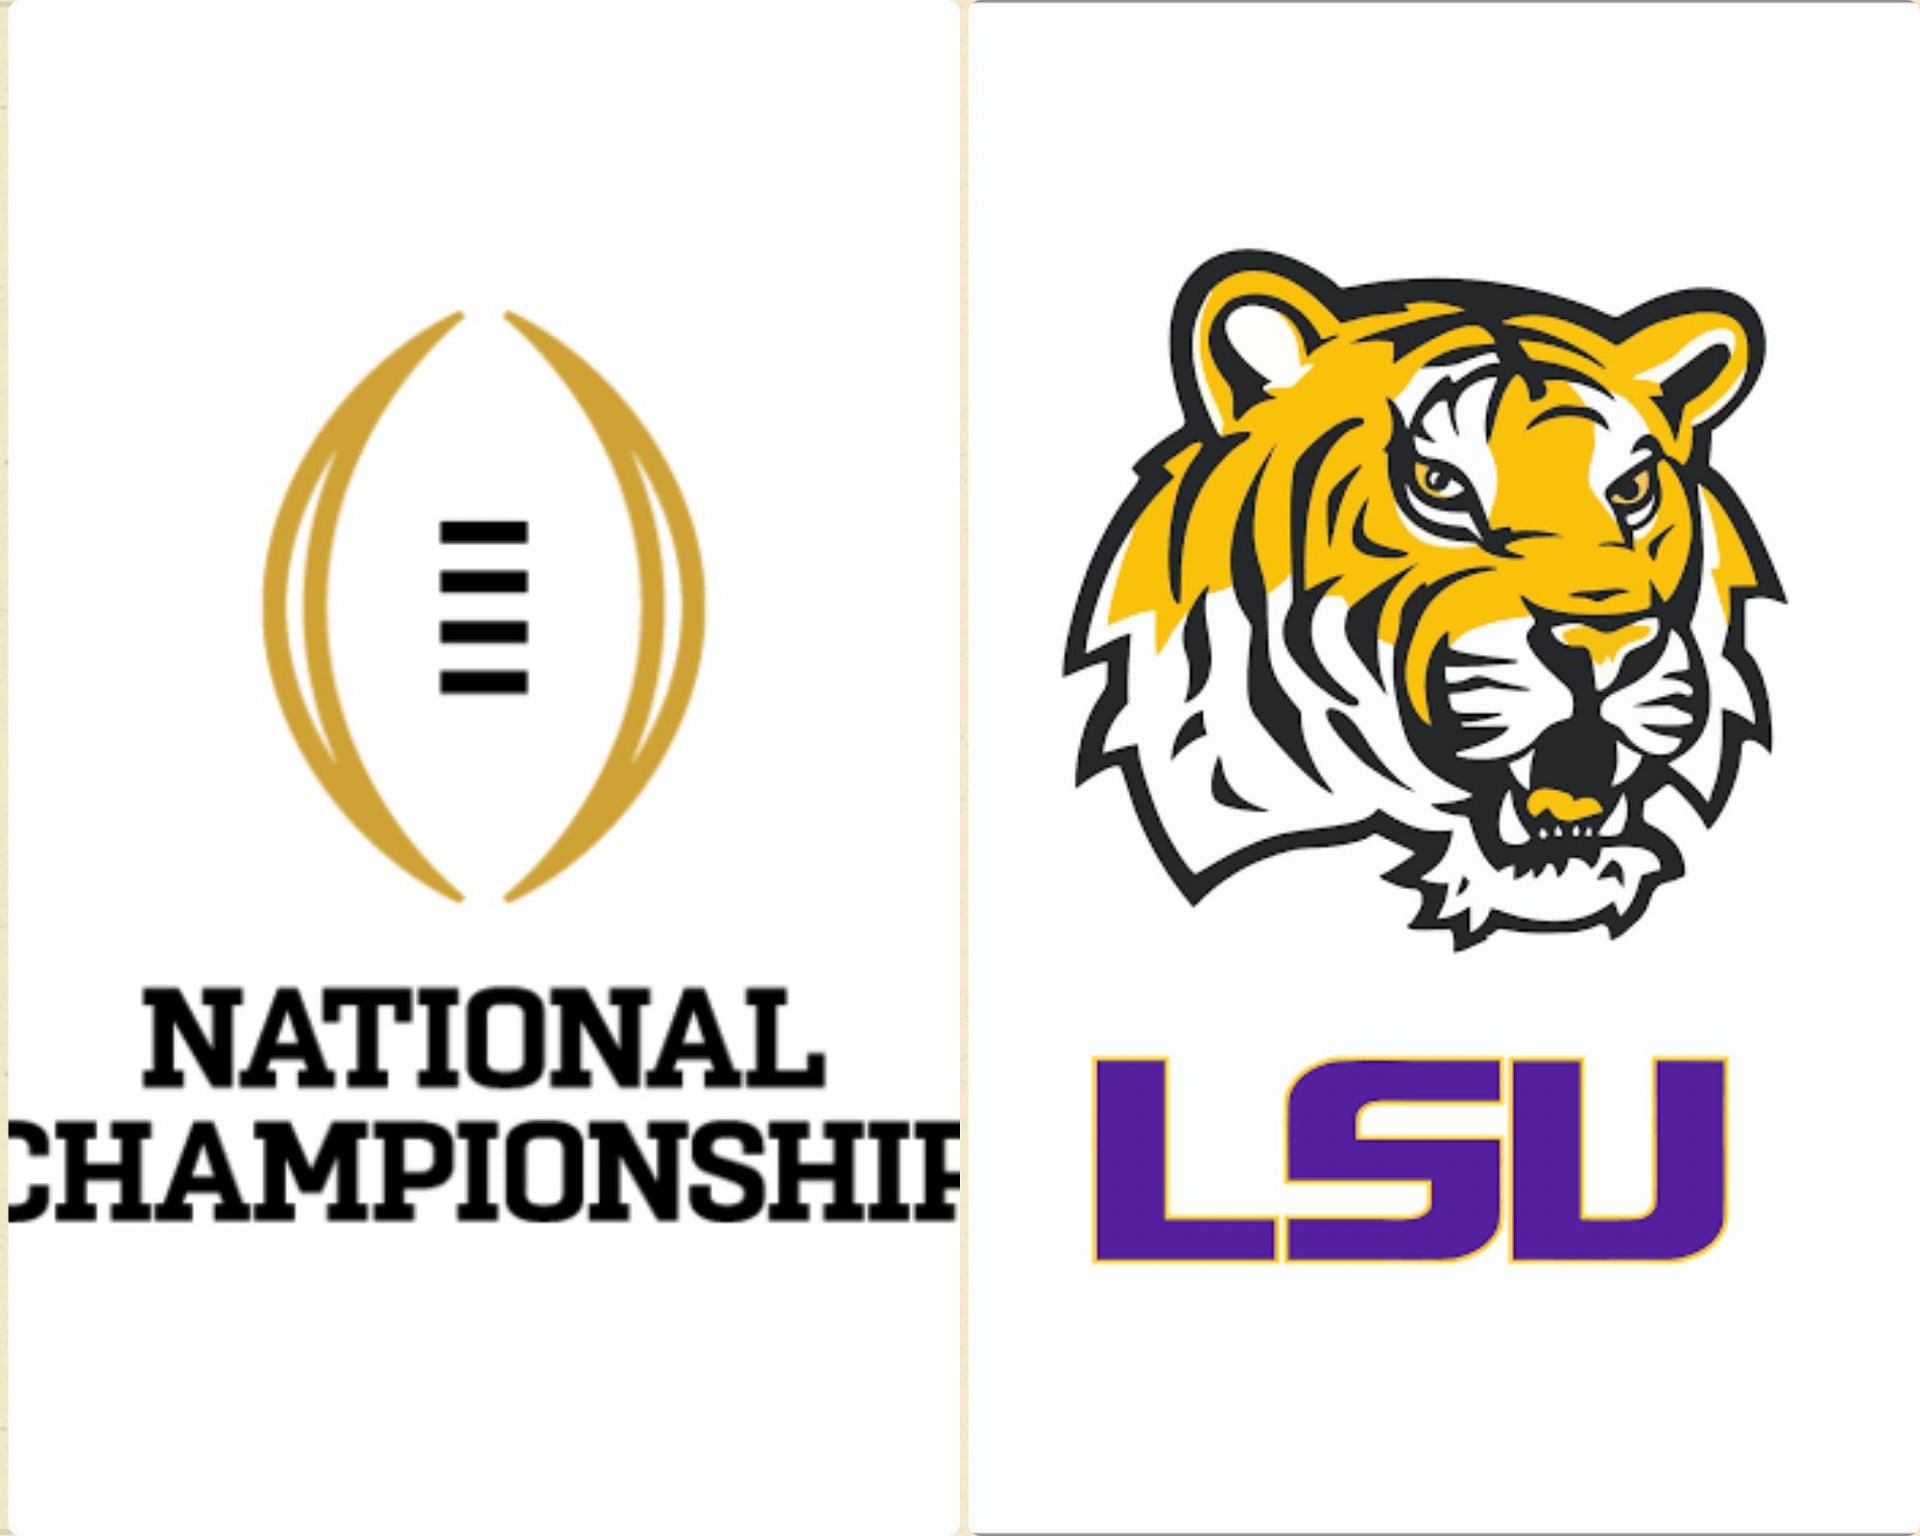 The LSU Tigers have claimed the college football national championship four times 